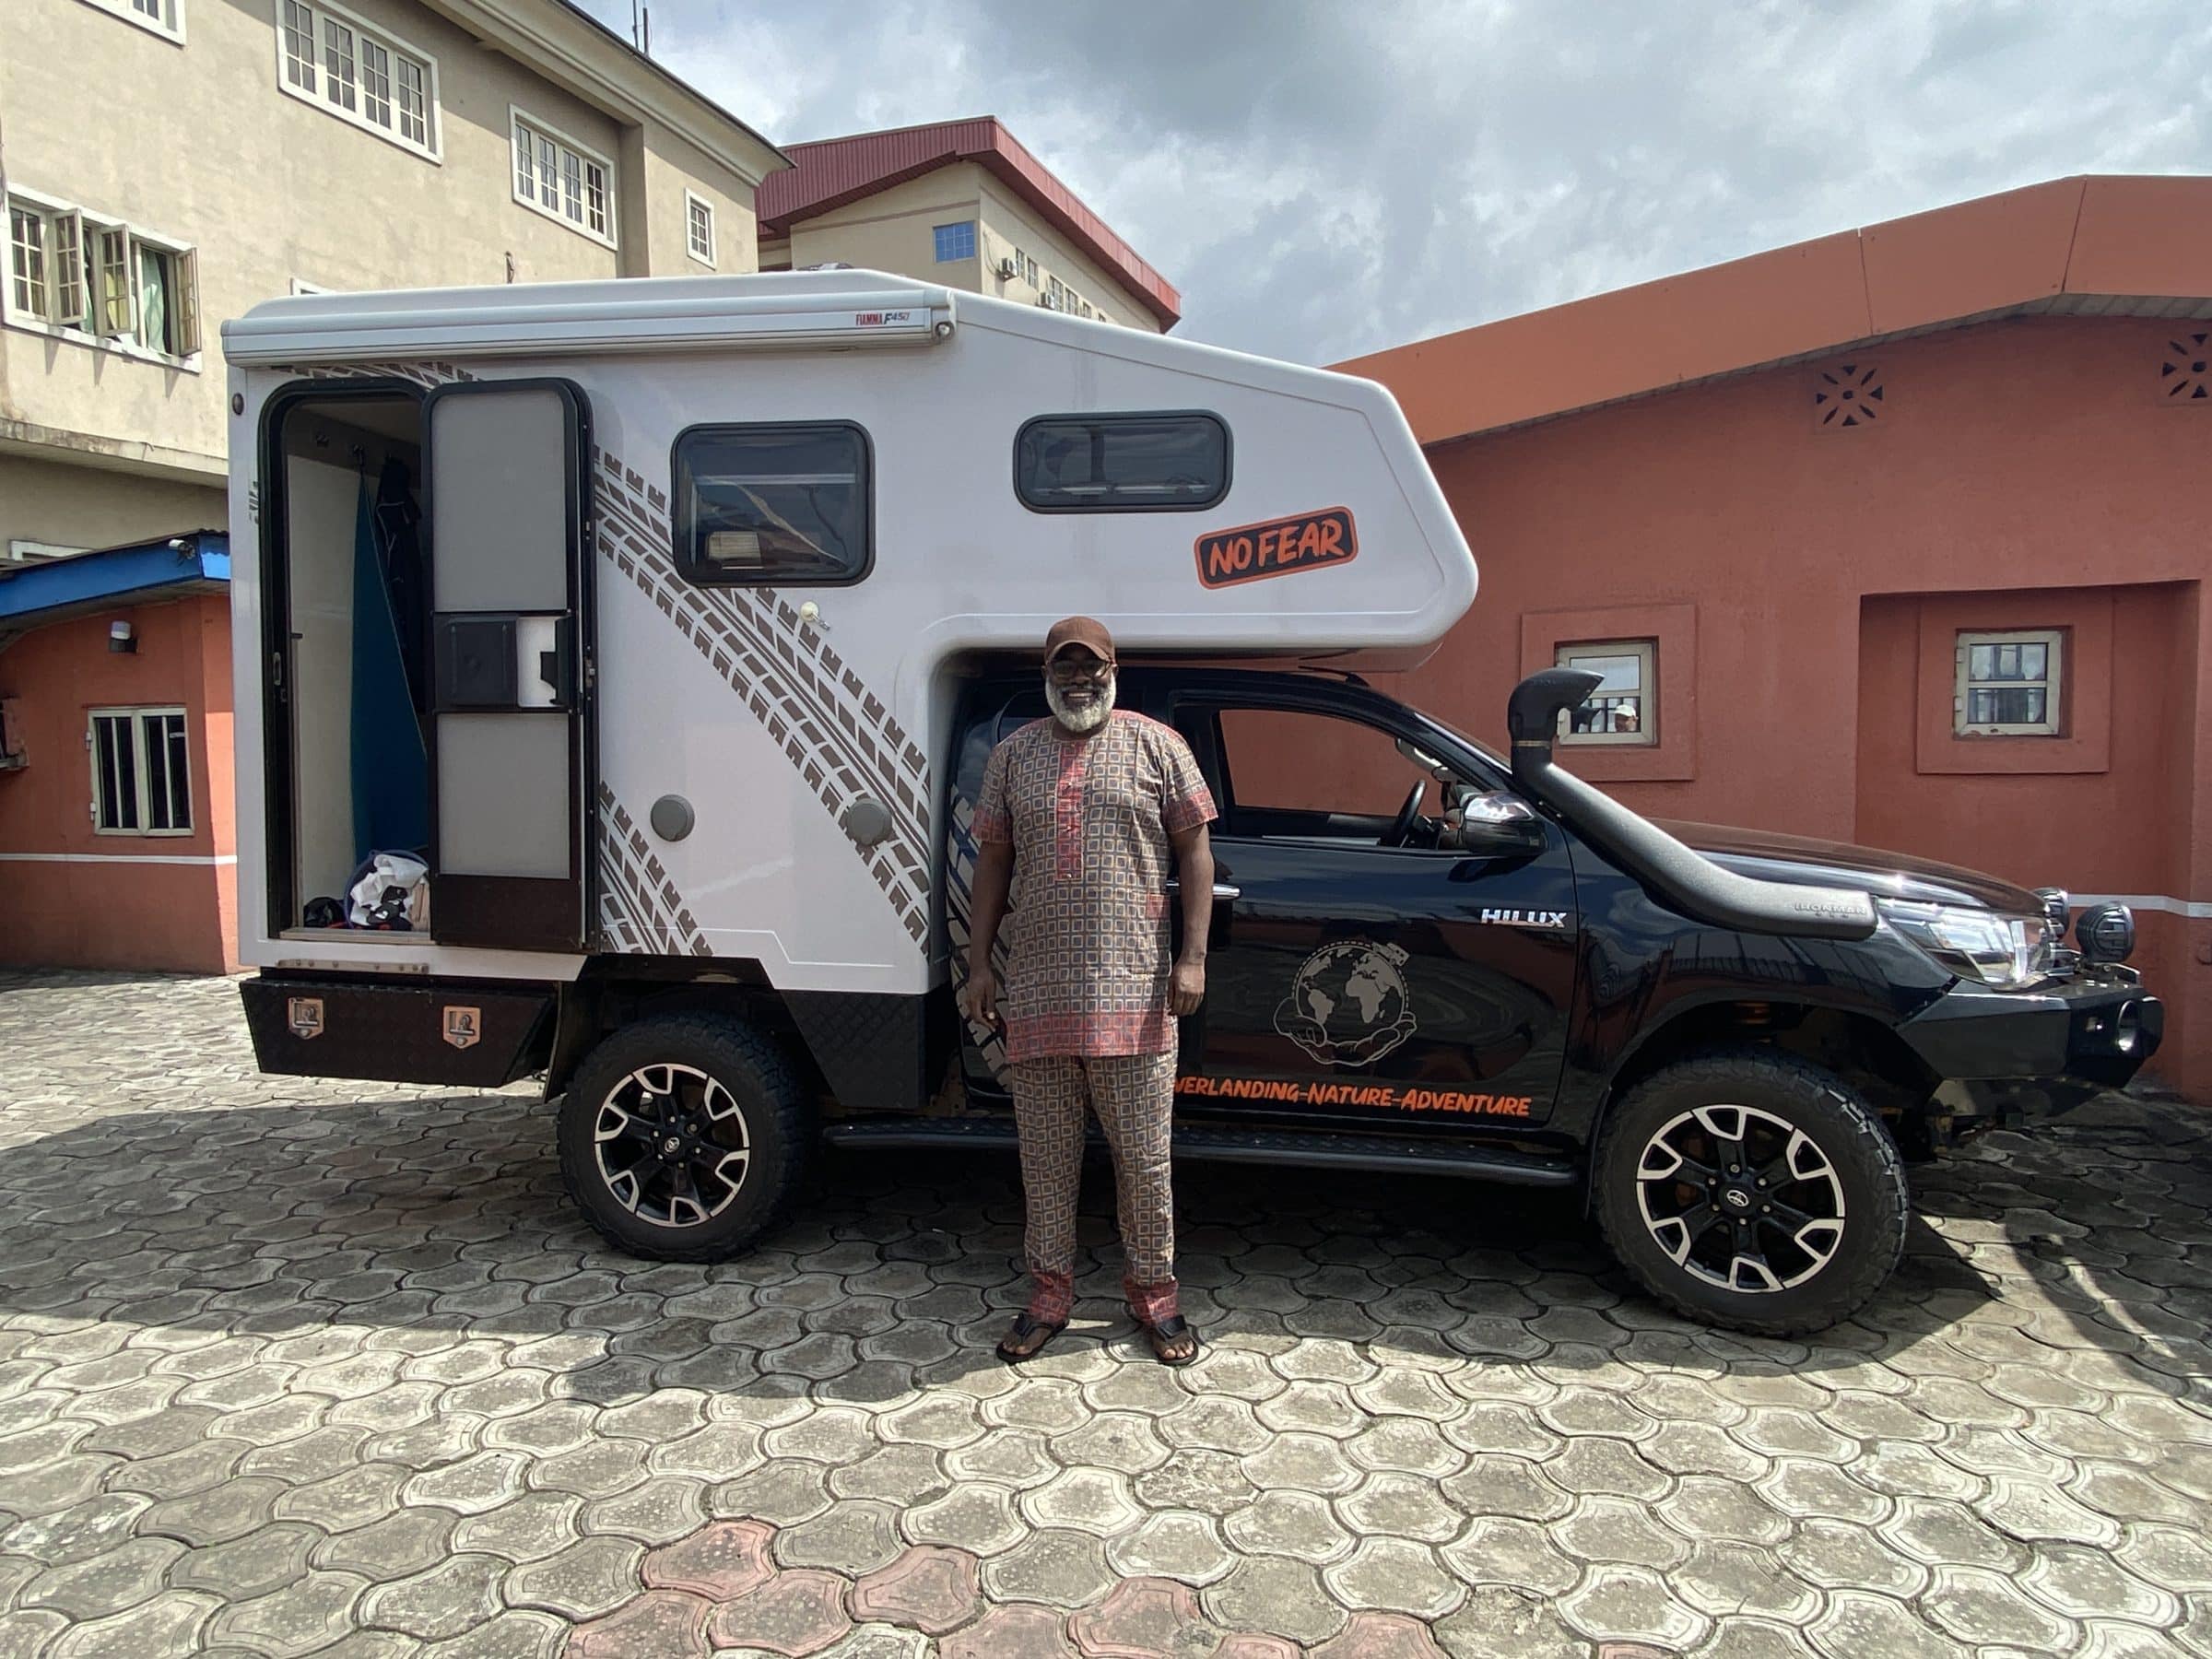 Okiki, the hotel owner in the picture with our Overlander